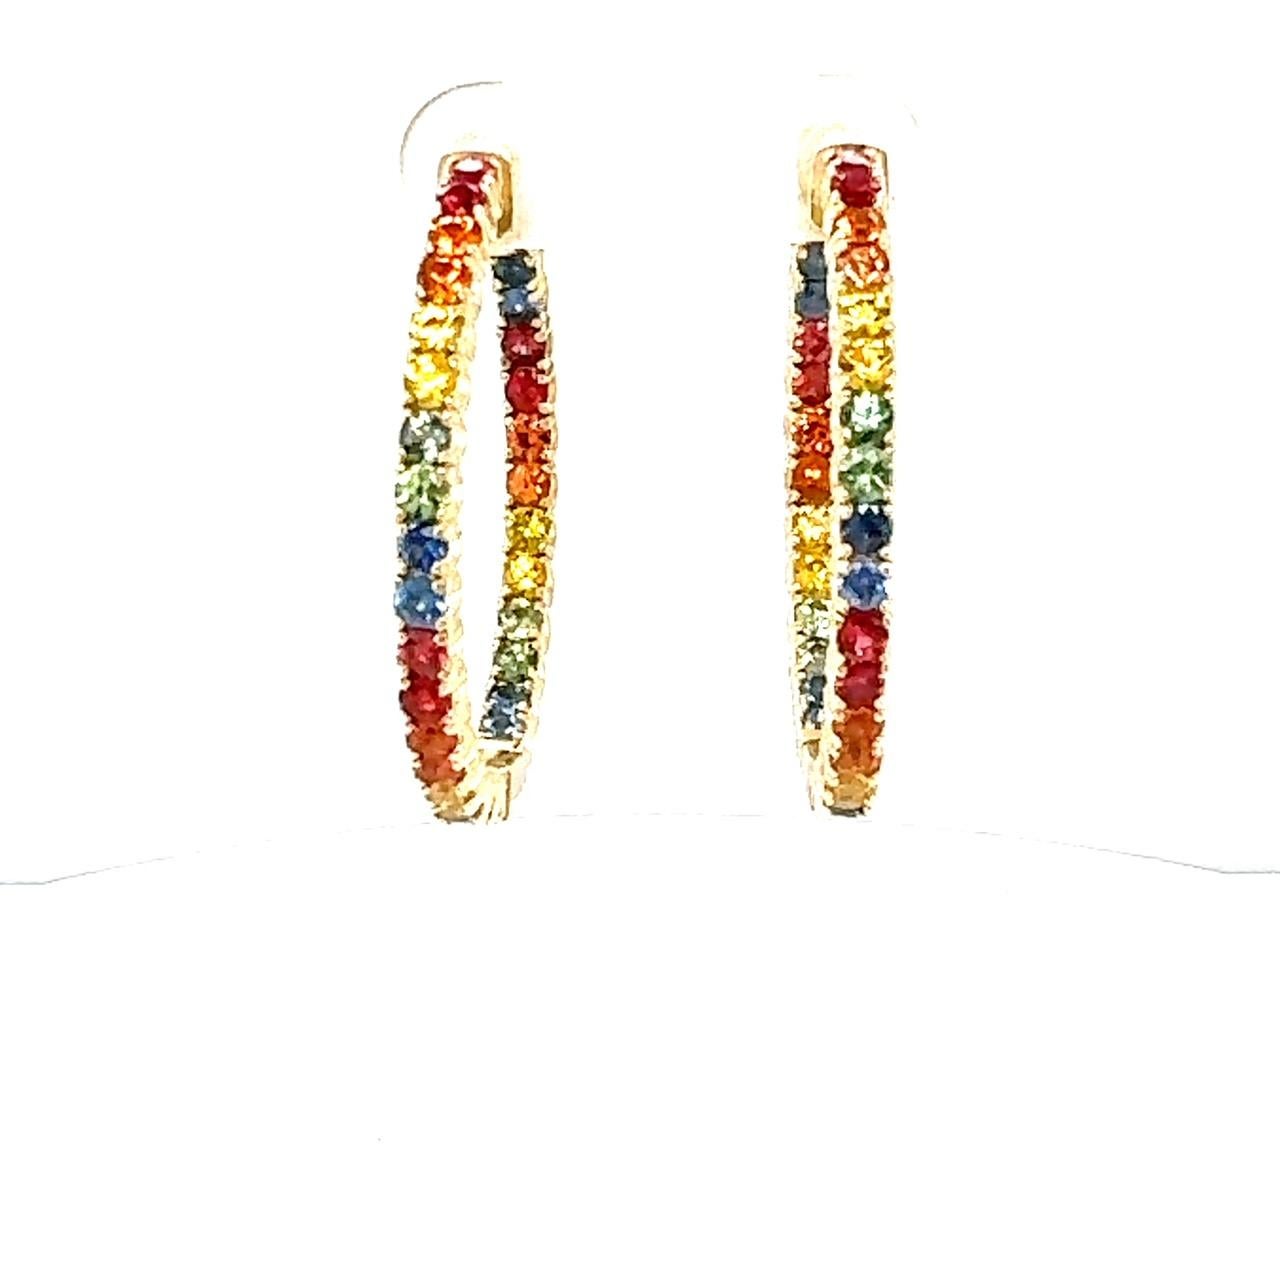 4.12 Carat Rainbow Sapphire Yellow Gold Hoop Earrings
Beautiful Statement Earrings 

Item Specs:

60 Round Cut Multi-Colored Natural Sapphires weighing 4.12 carats
Total Carat Weight is 4.12 carats
Crafted in 14K Yellow Gold approximately 6.9